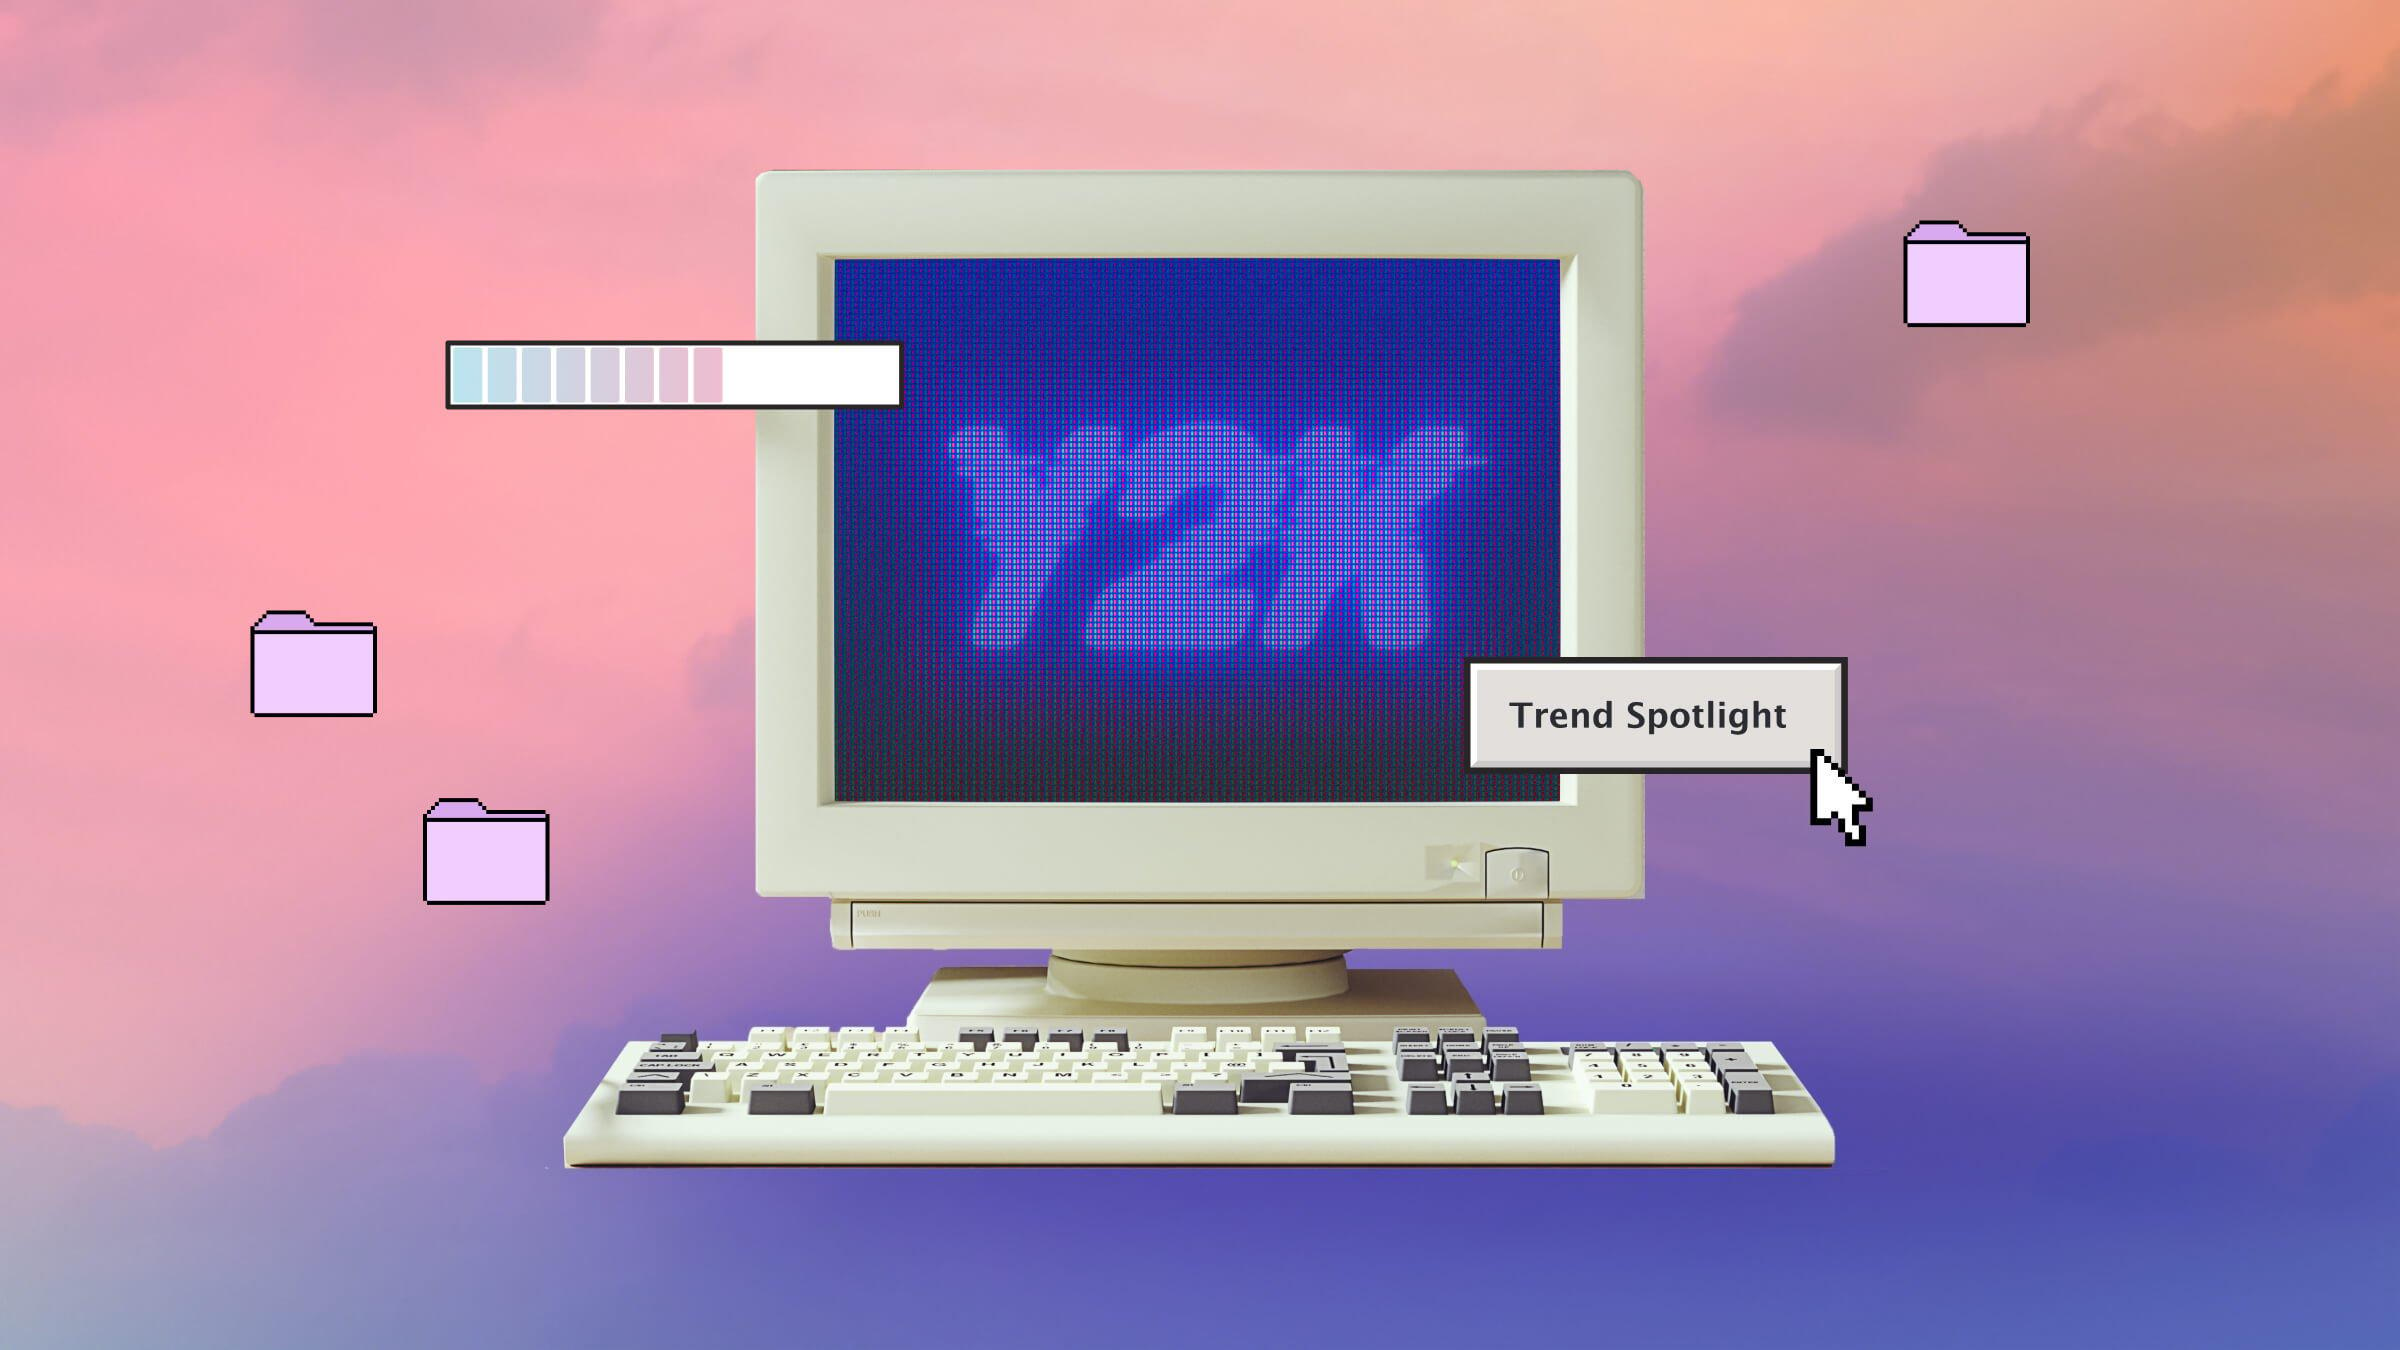 Y2K Aesthetic icons (100 assets for Logos, graphic design, Clothing)